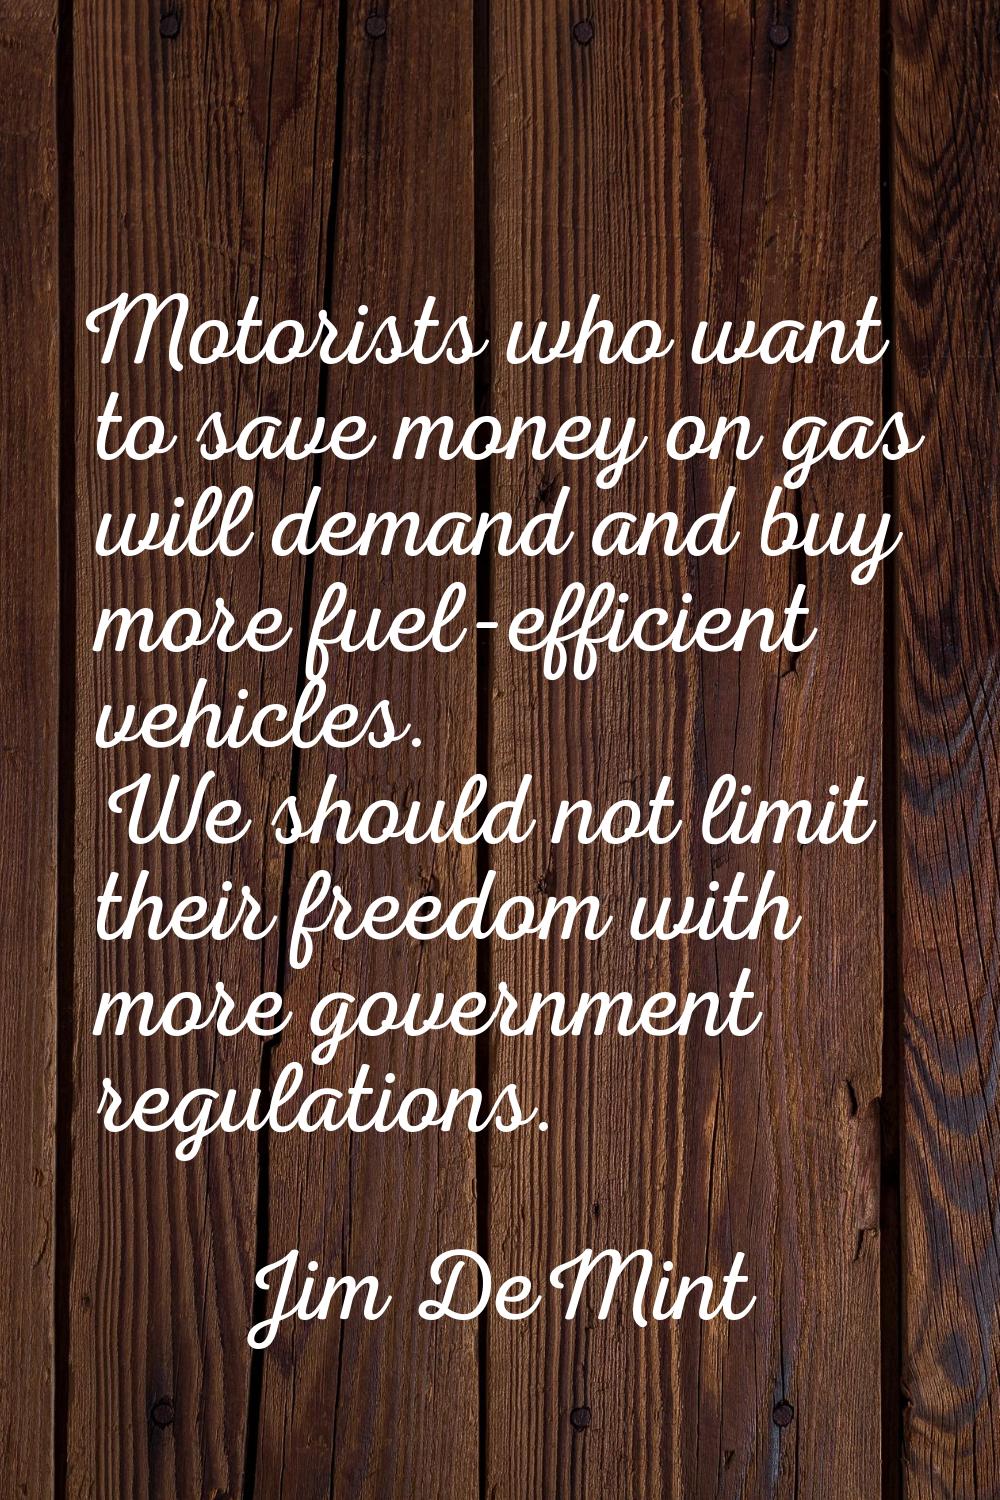 Motorists who want to save money on gas will demand and buy more fuel-efficient vehicles. We should